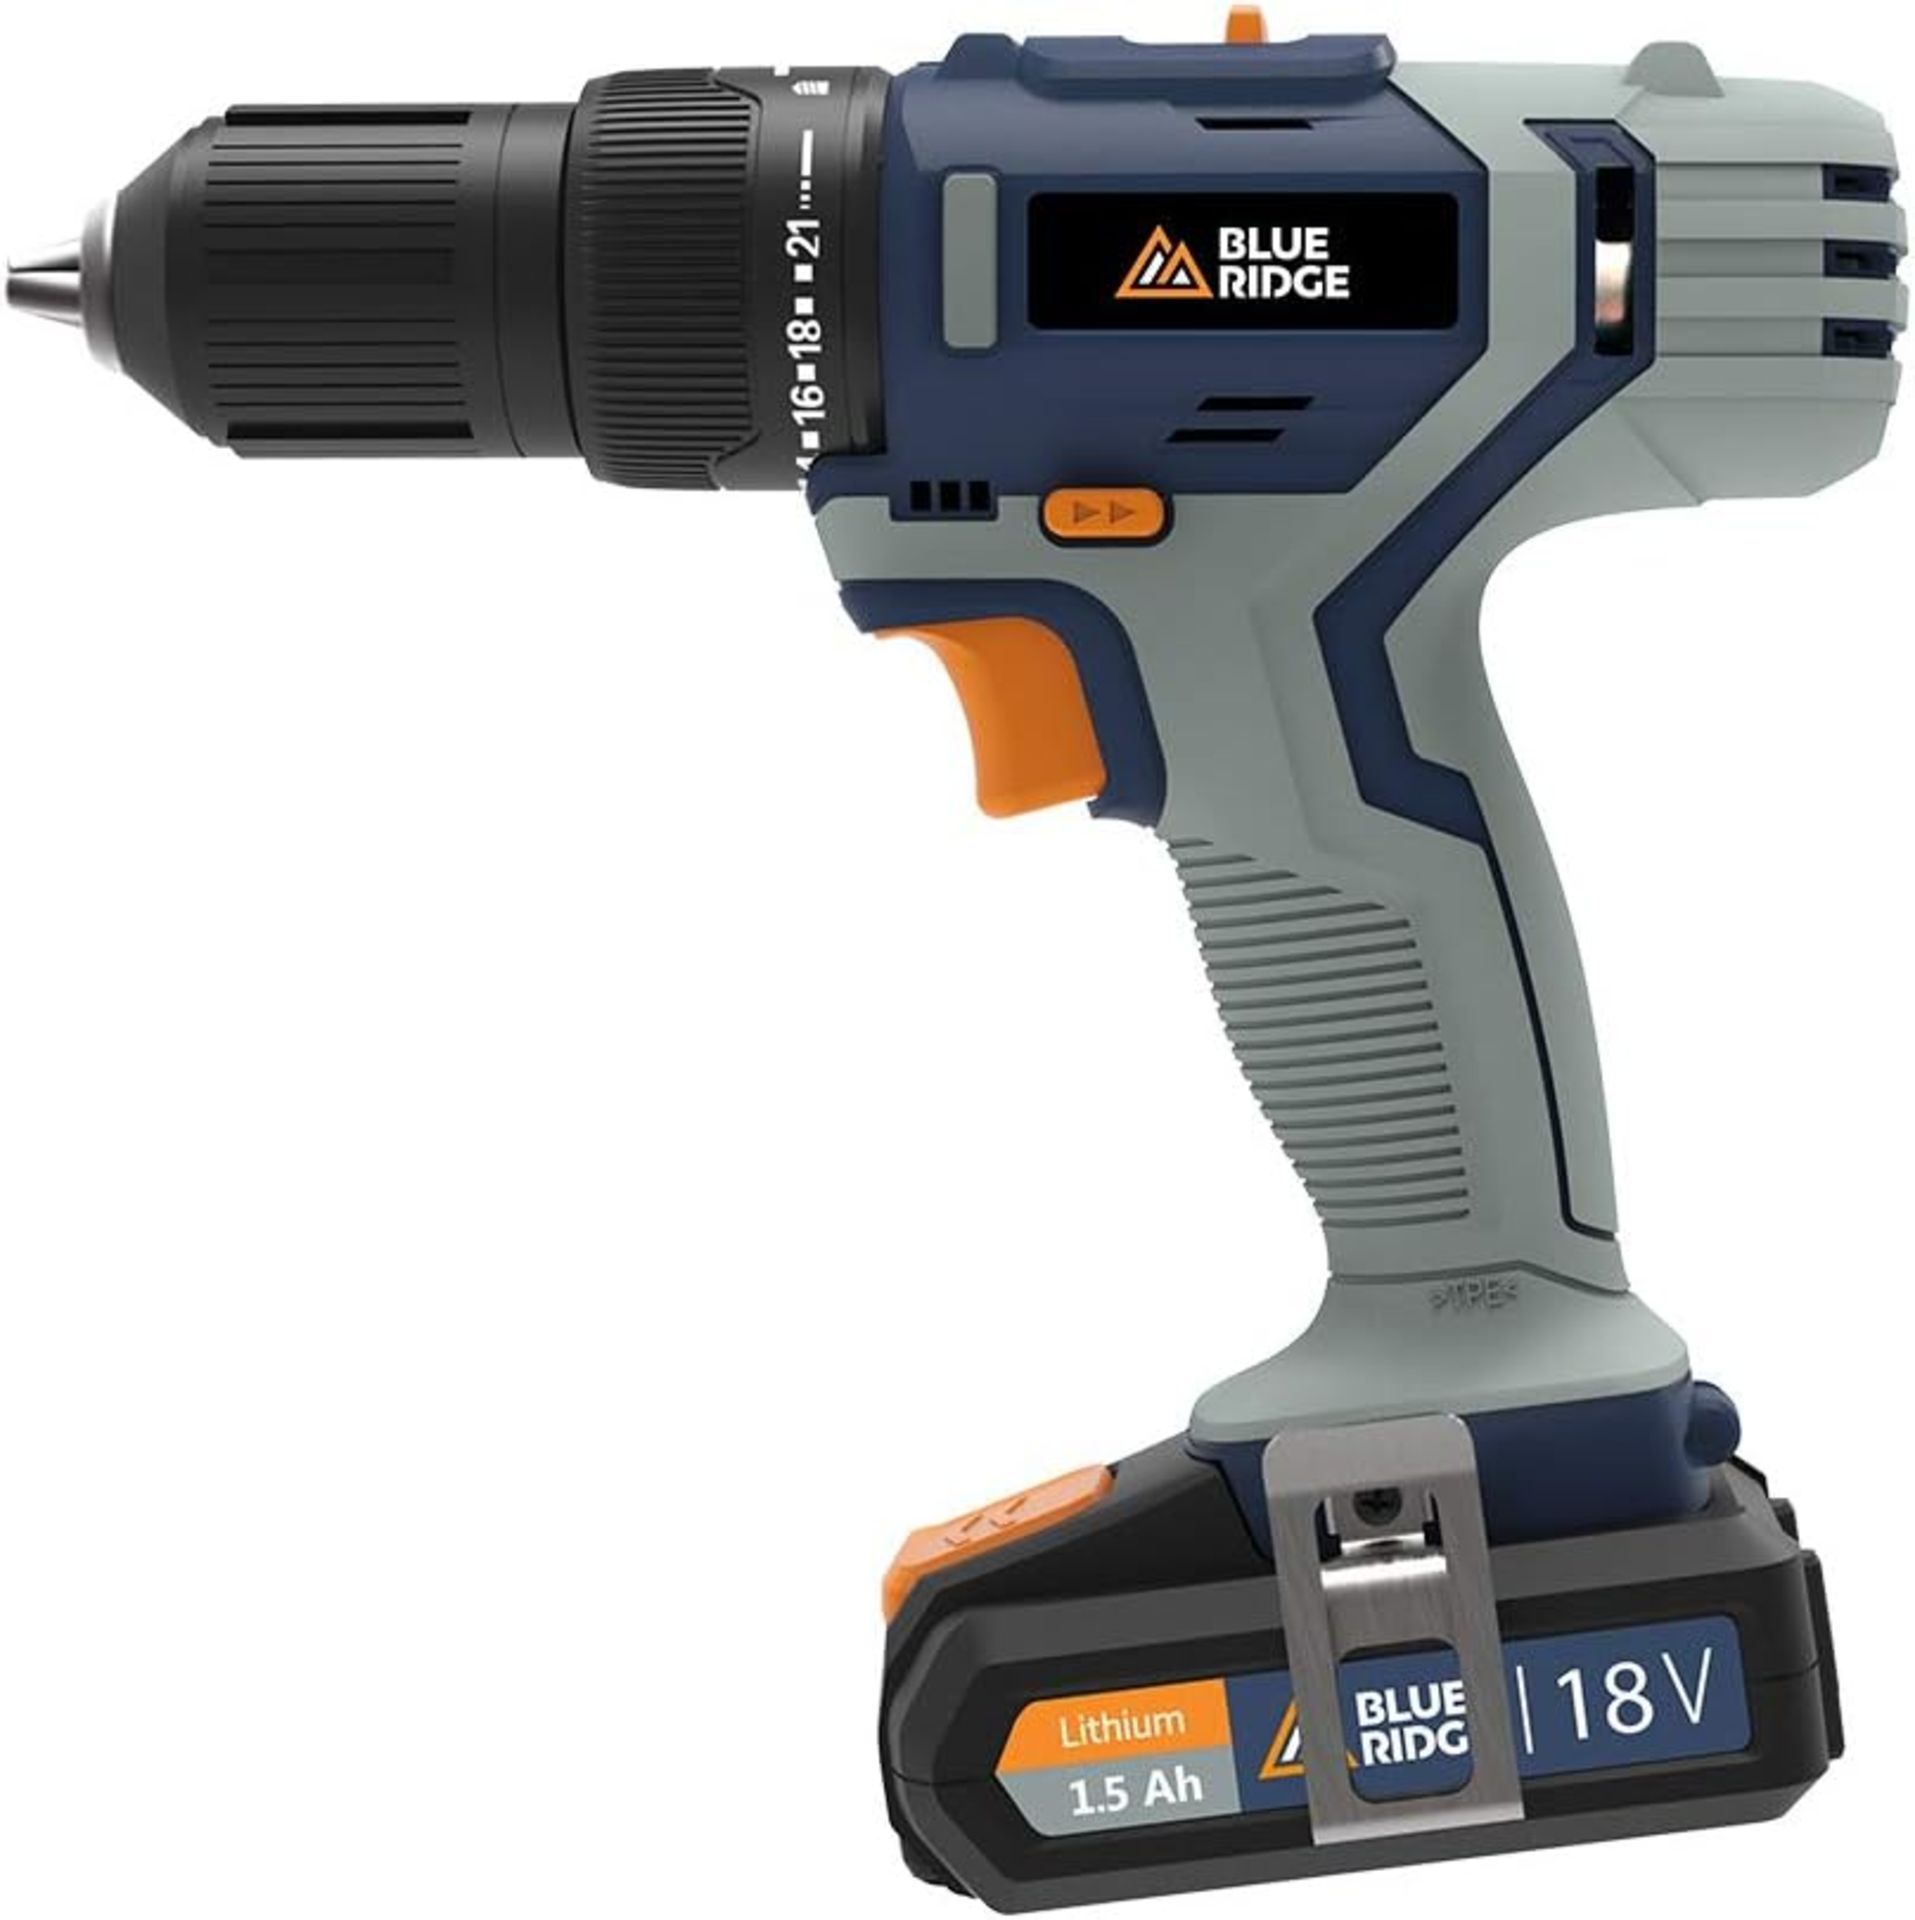 NEW & BOXED BLUE RIDGE 18V Cordless Hammer Drill with 2 x 1.5 Ah Li-ion Batteries & 43 Piece - Image 2 of 3